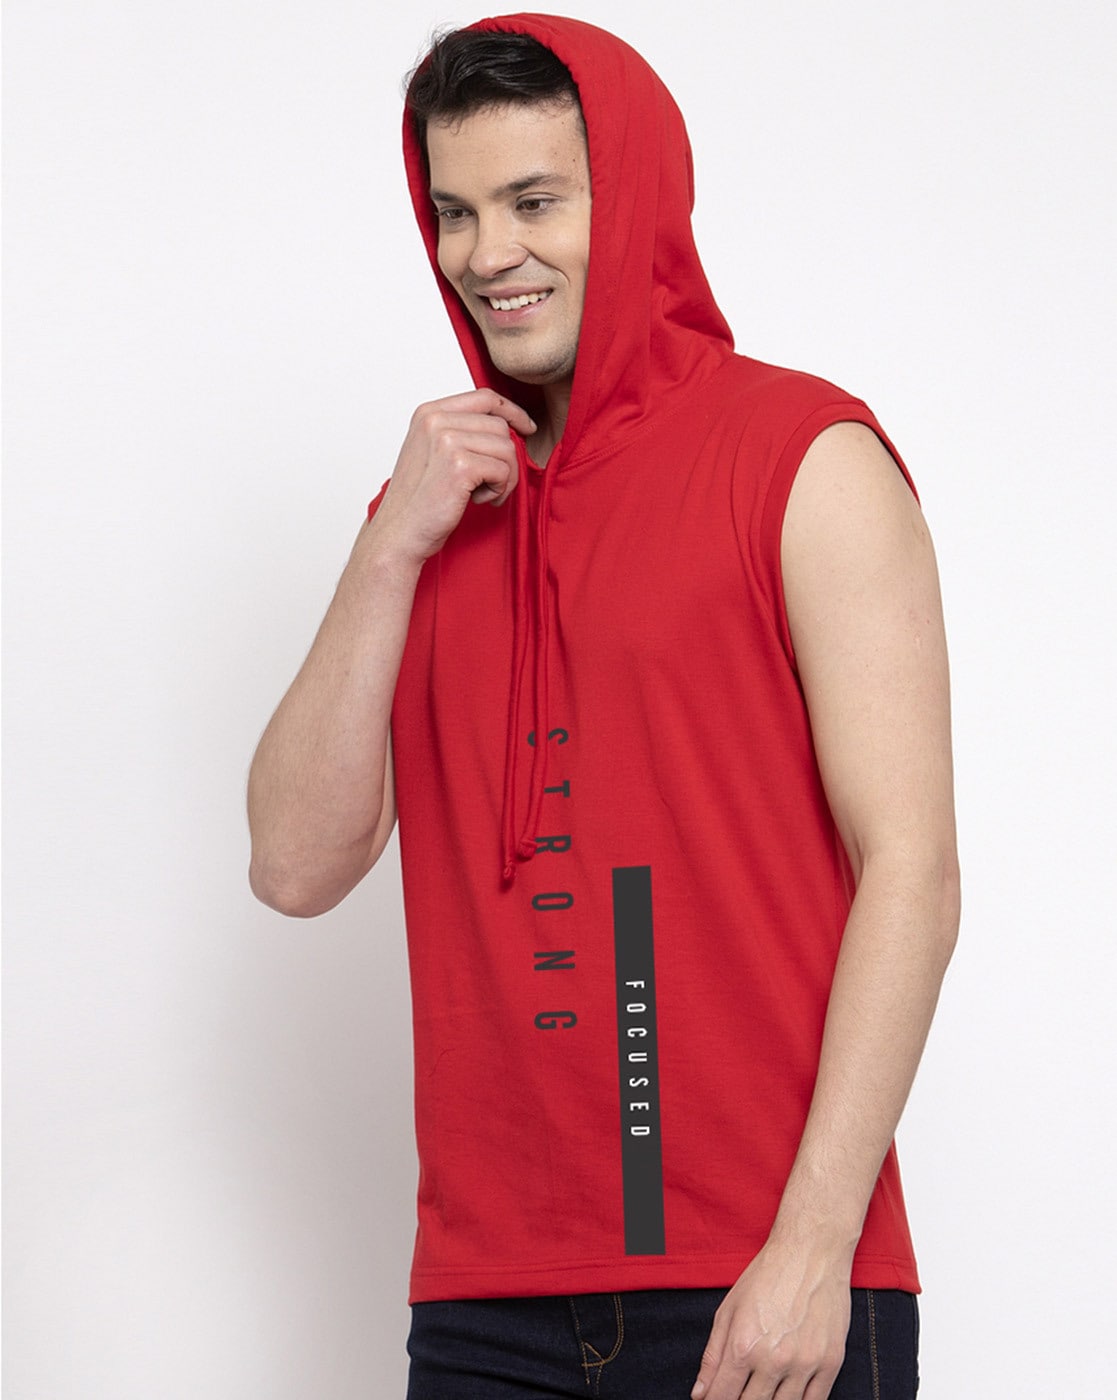 Red Sleeveless Compression Hoodie